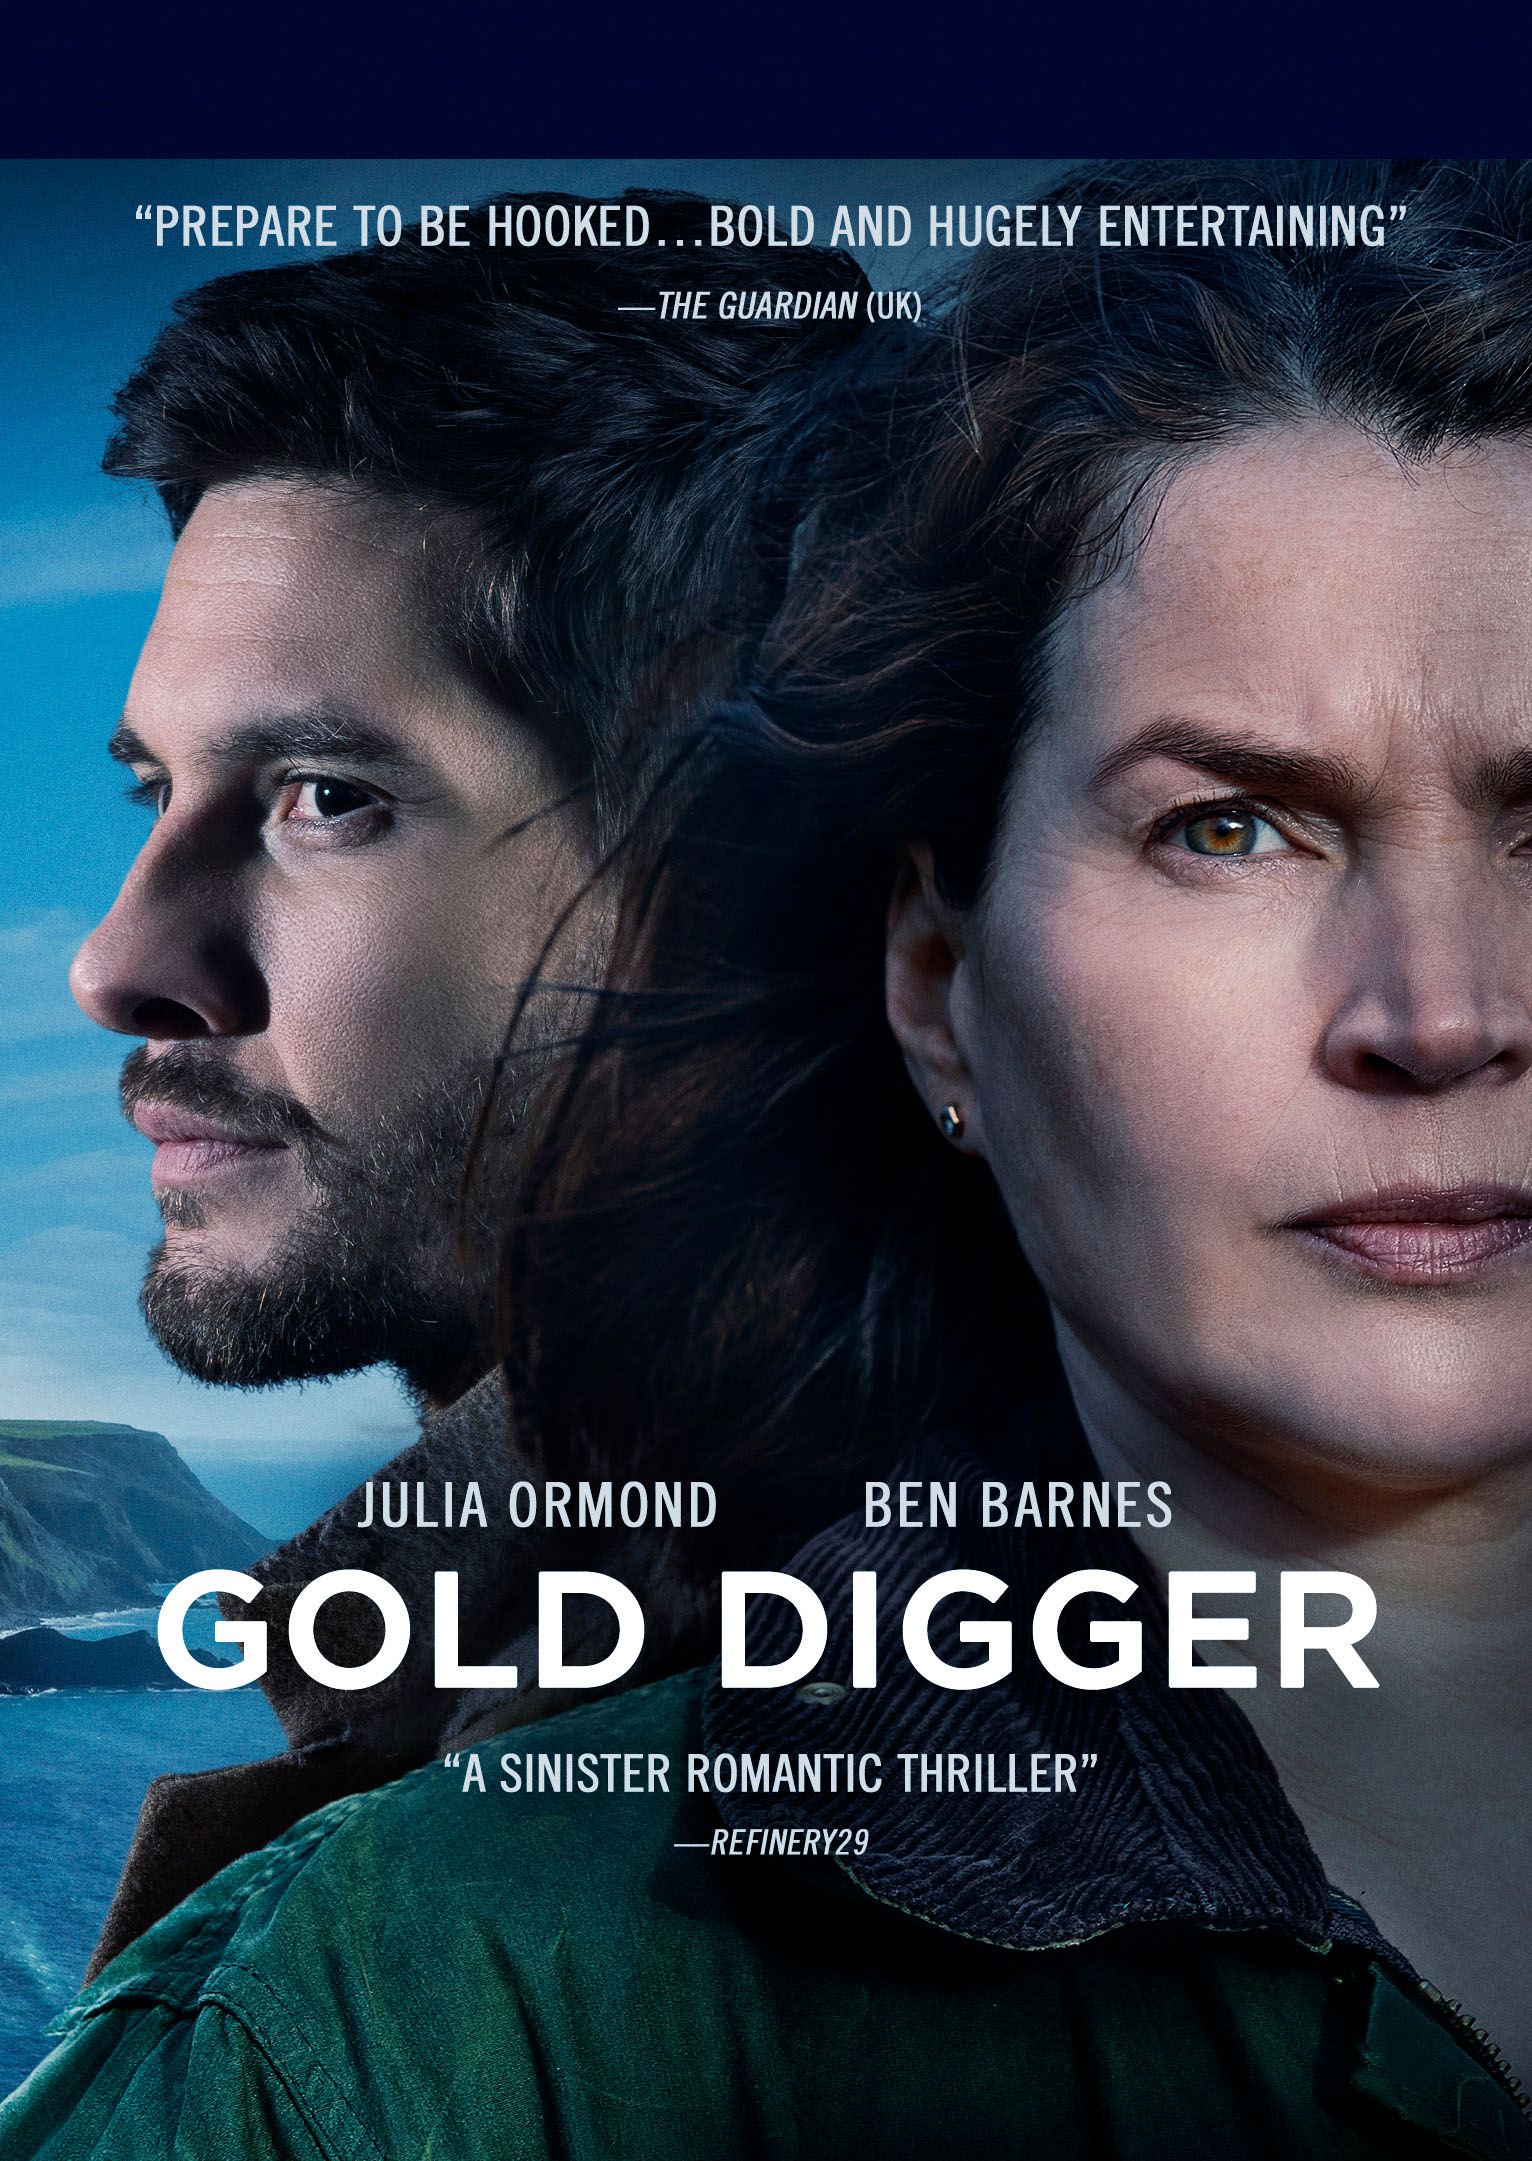 BBC's Gold Digger: Everything you need to know about the new series